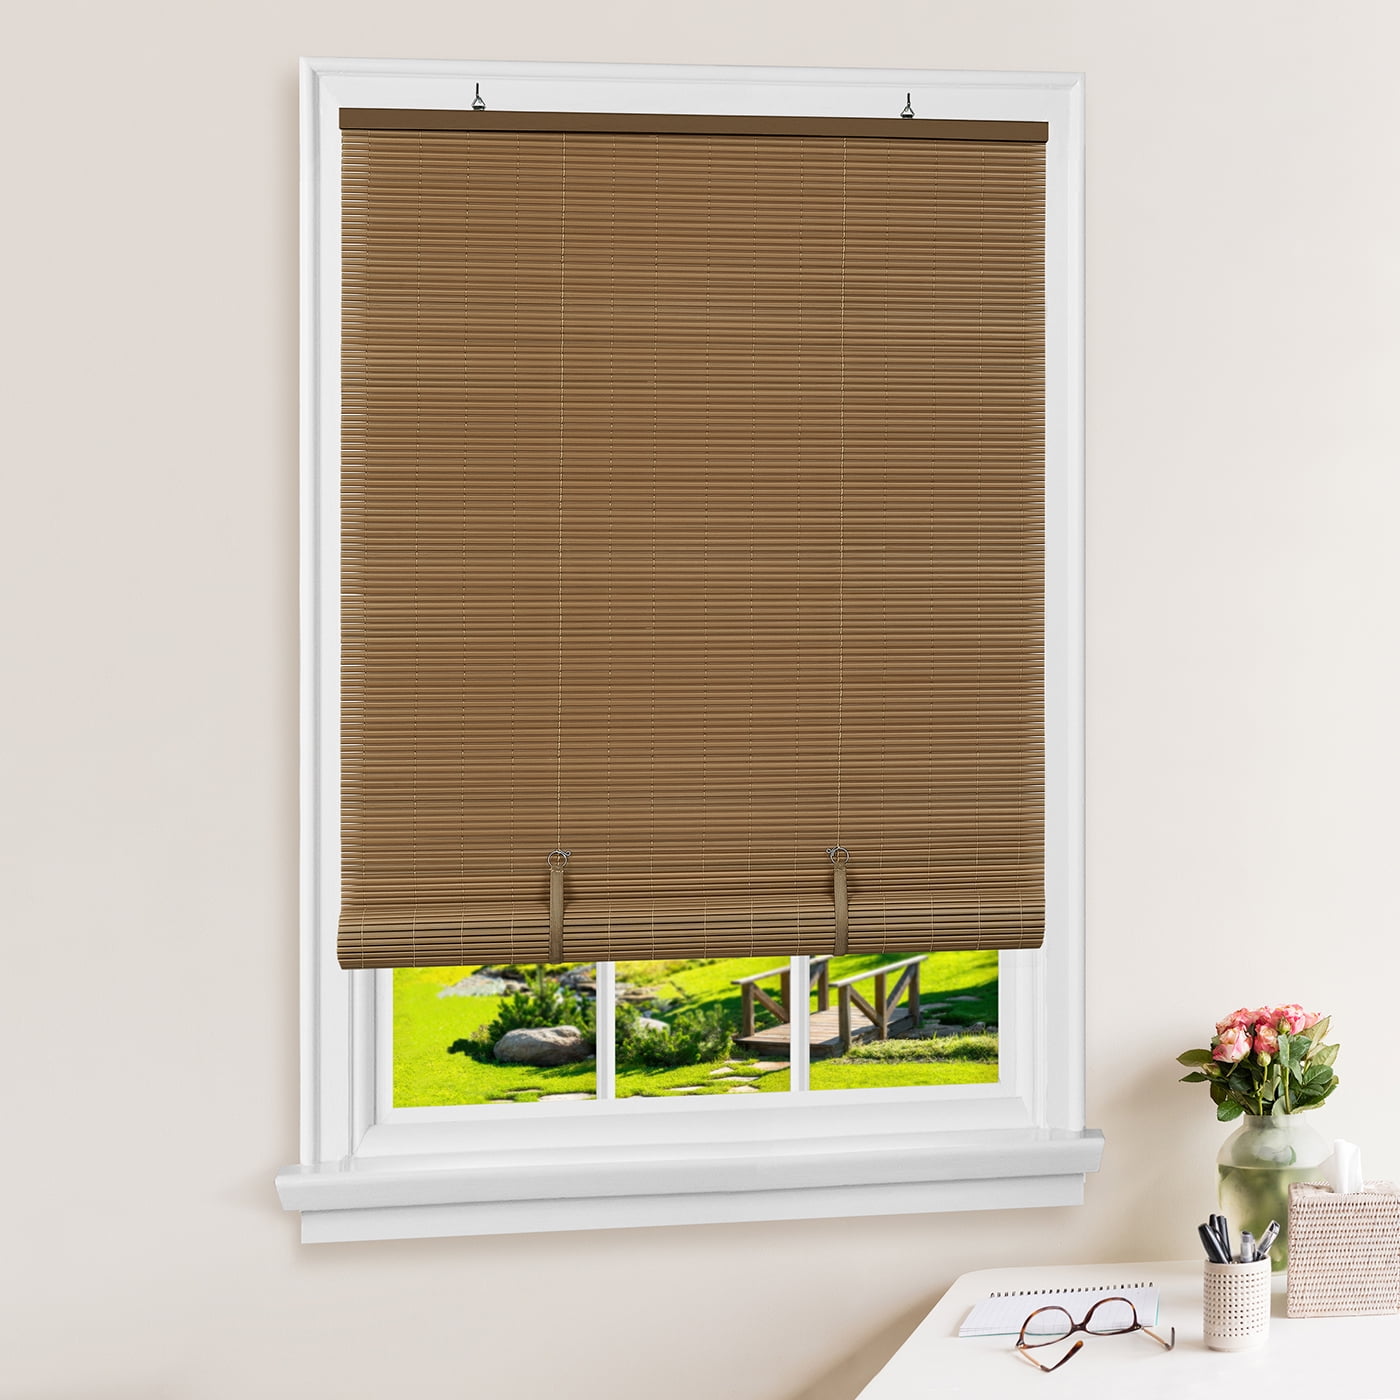 Two-Tone Oval Cordless Rollup Light Filtering Window Blinds Shades